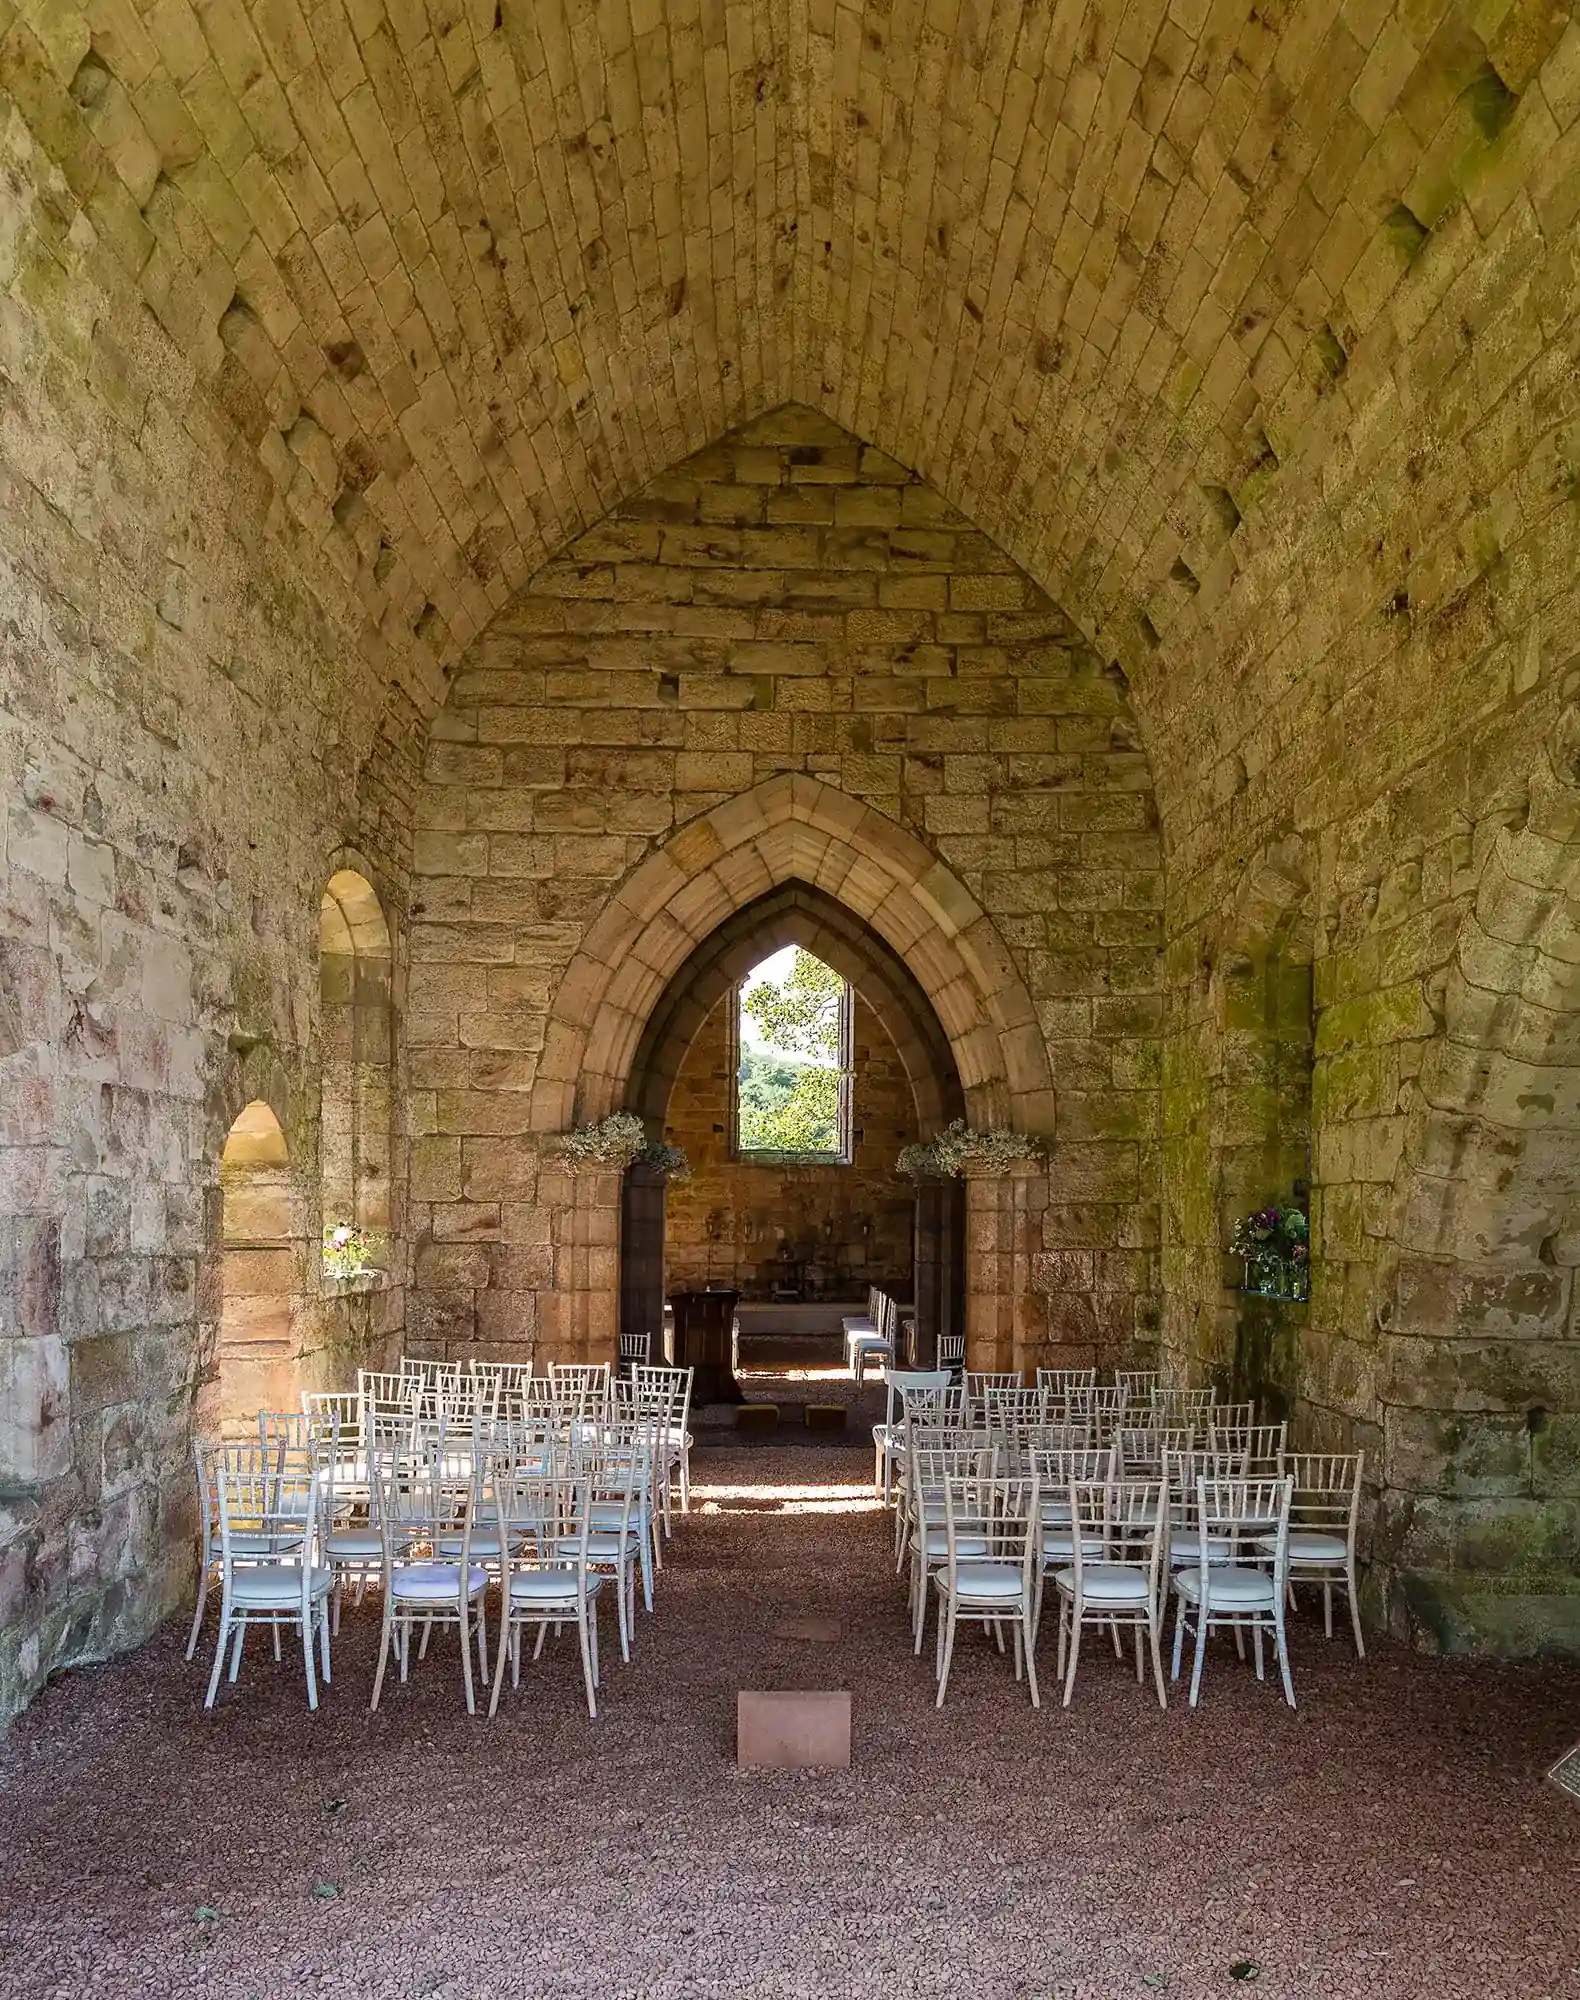 interior of Dunglass Collegiate Church viewed from the entrance arch